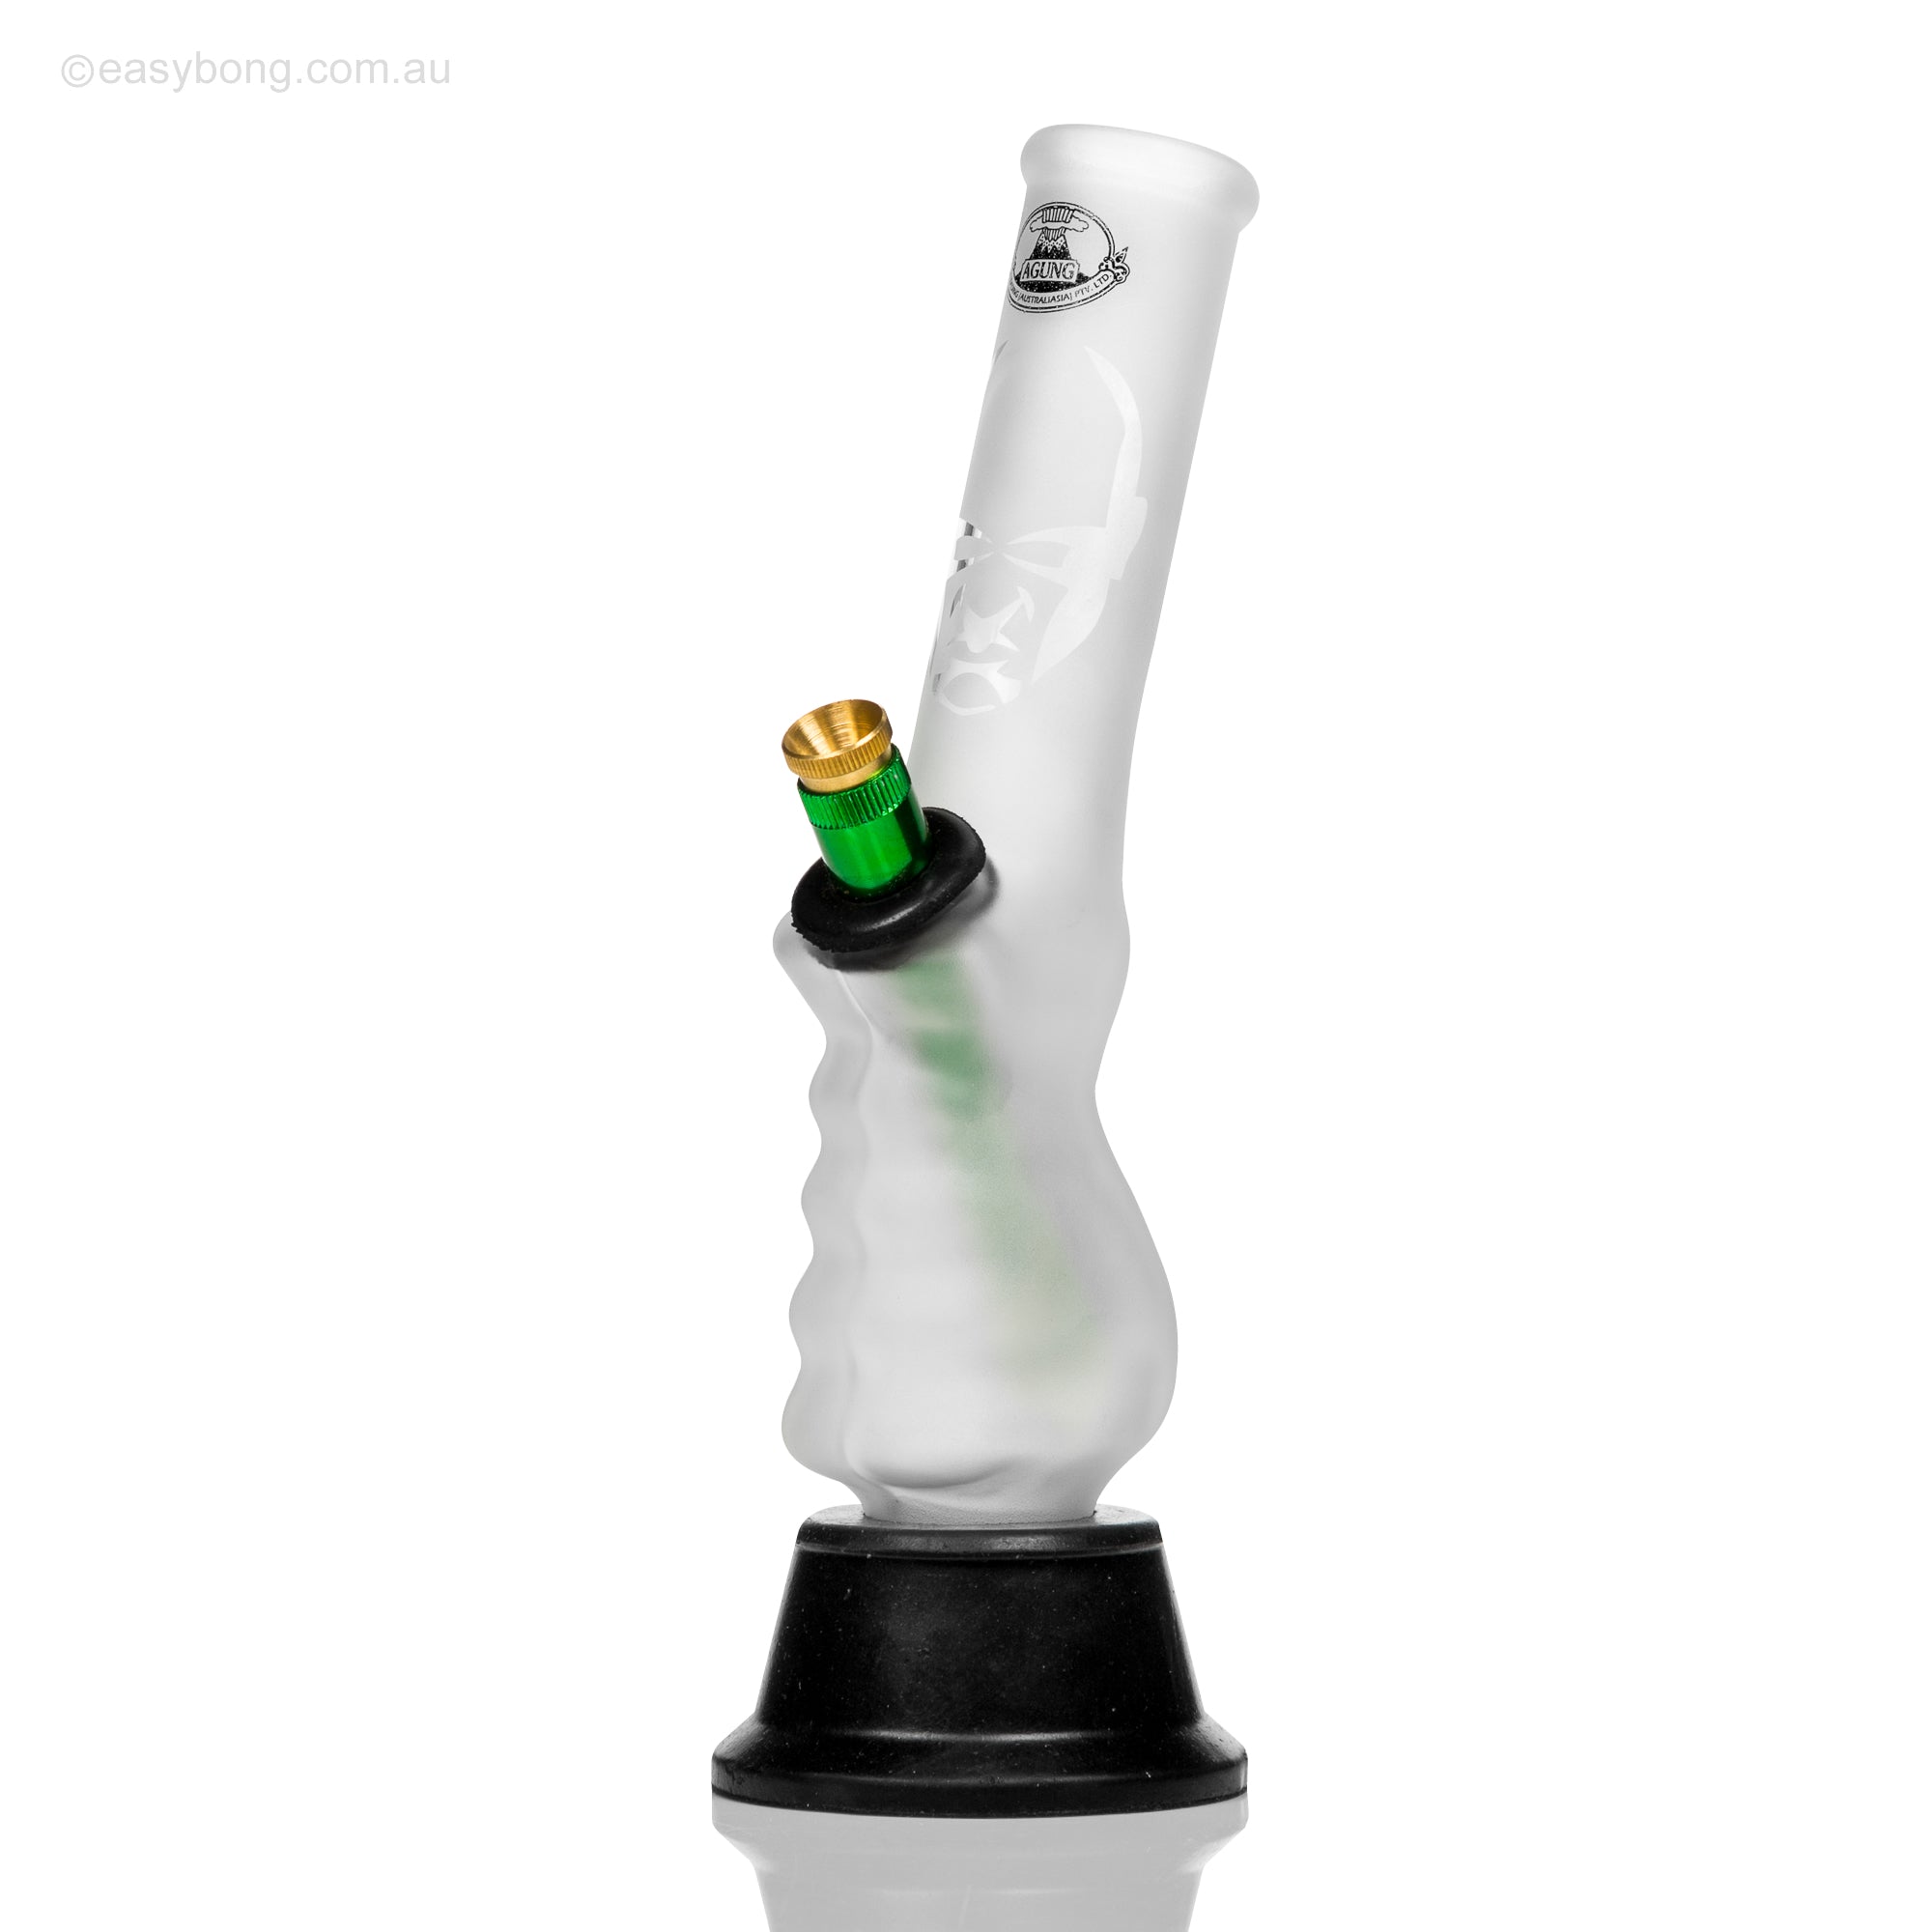 Agung frosted glass gripper bong with metal stem and brass cone piece.